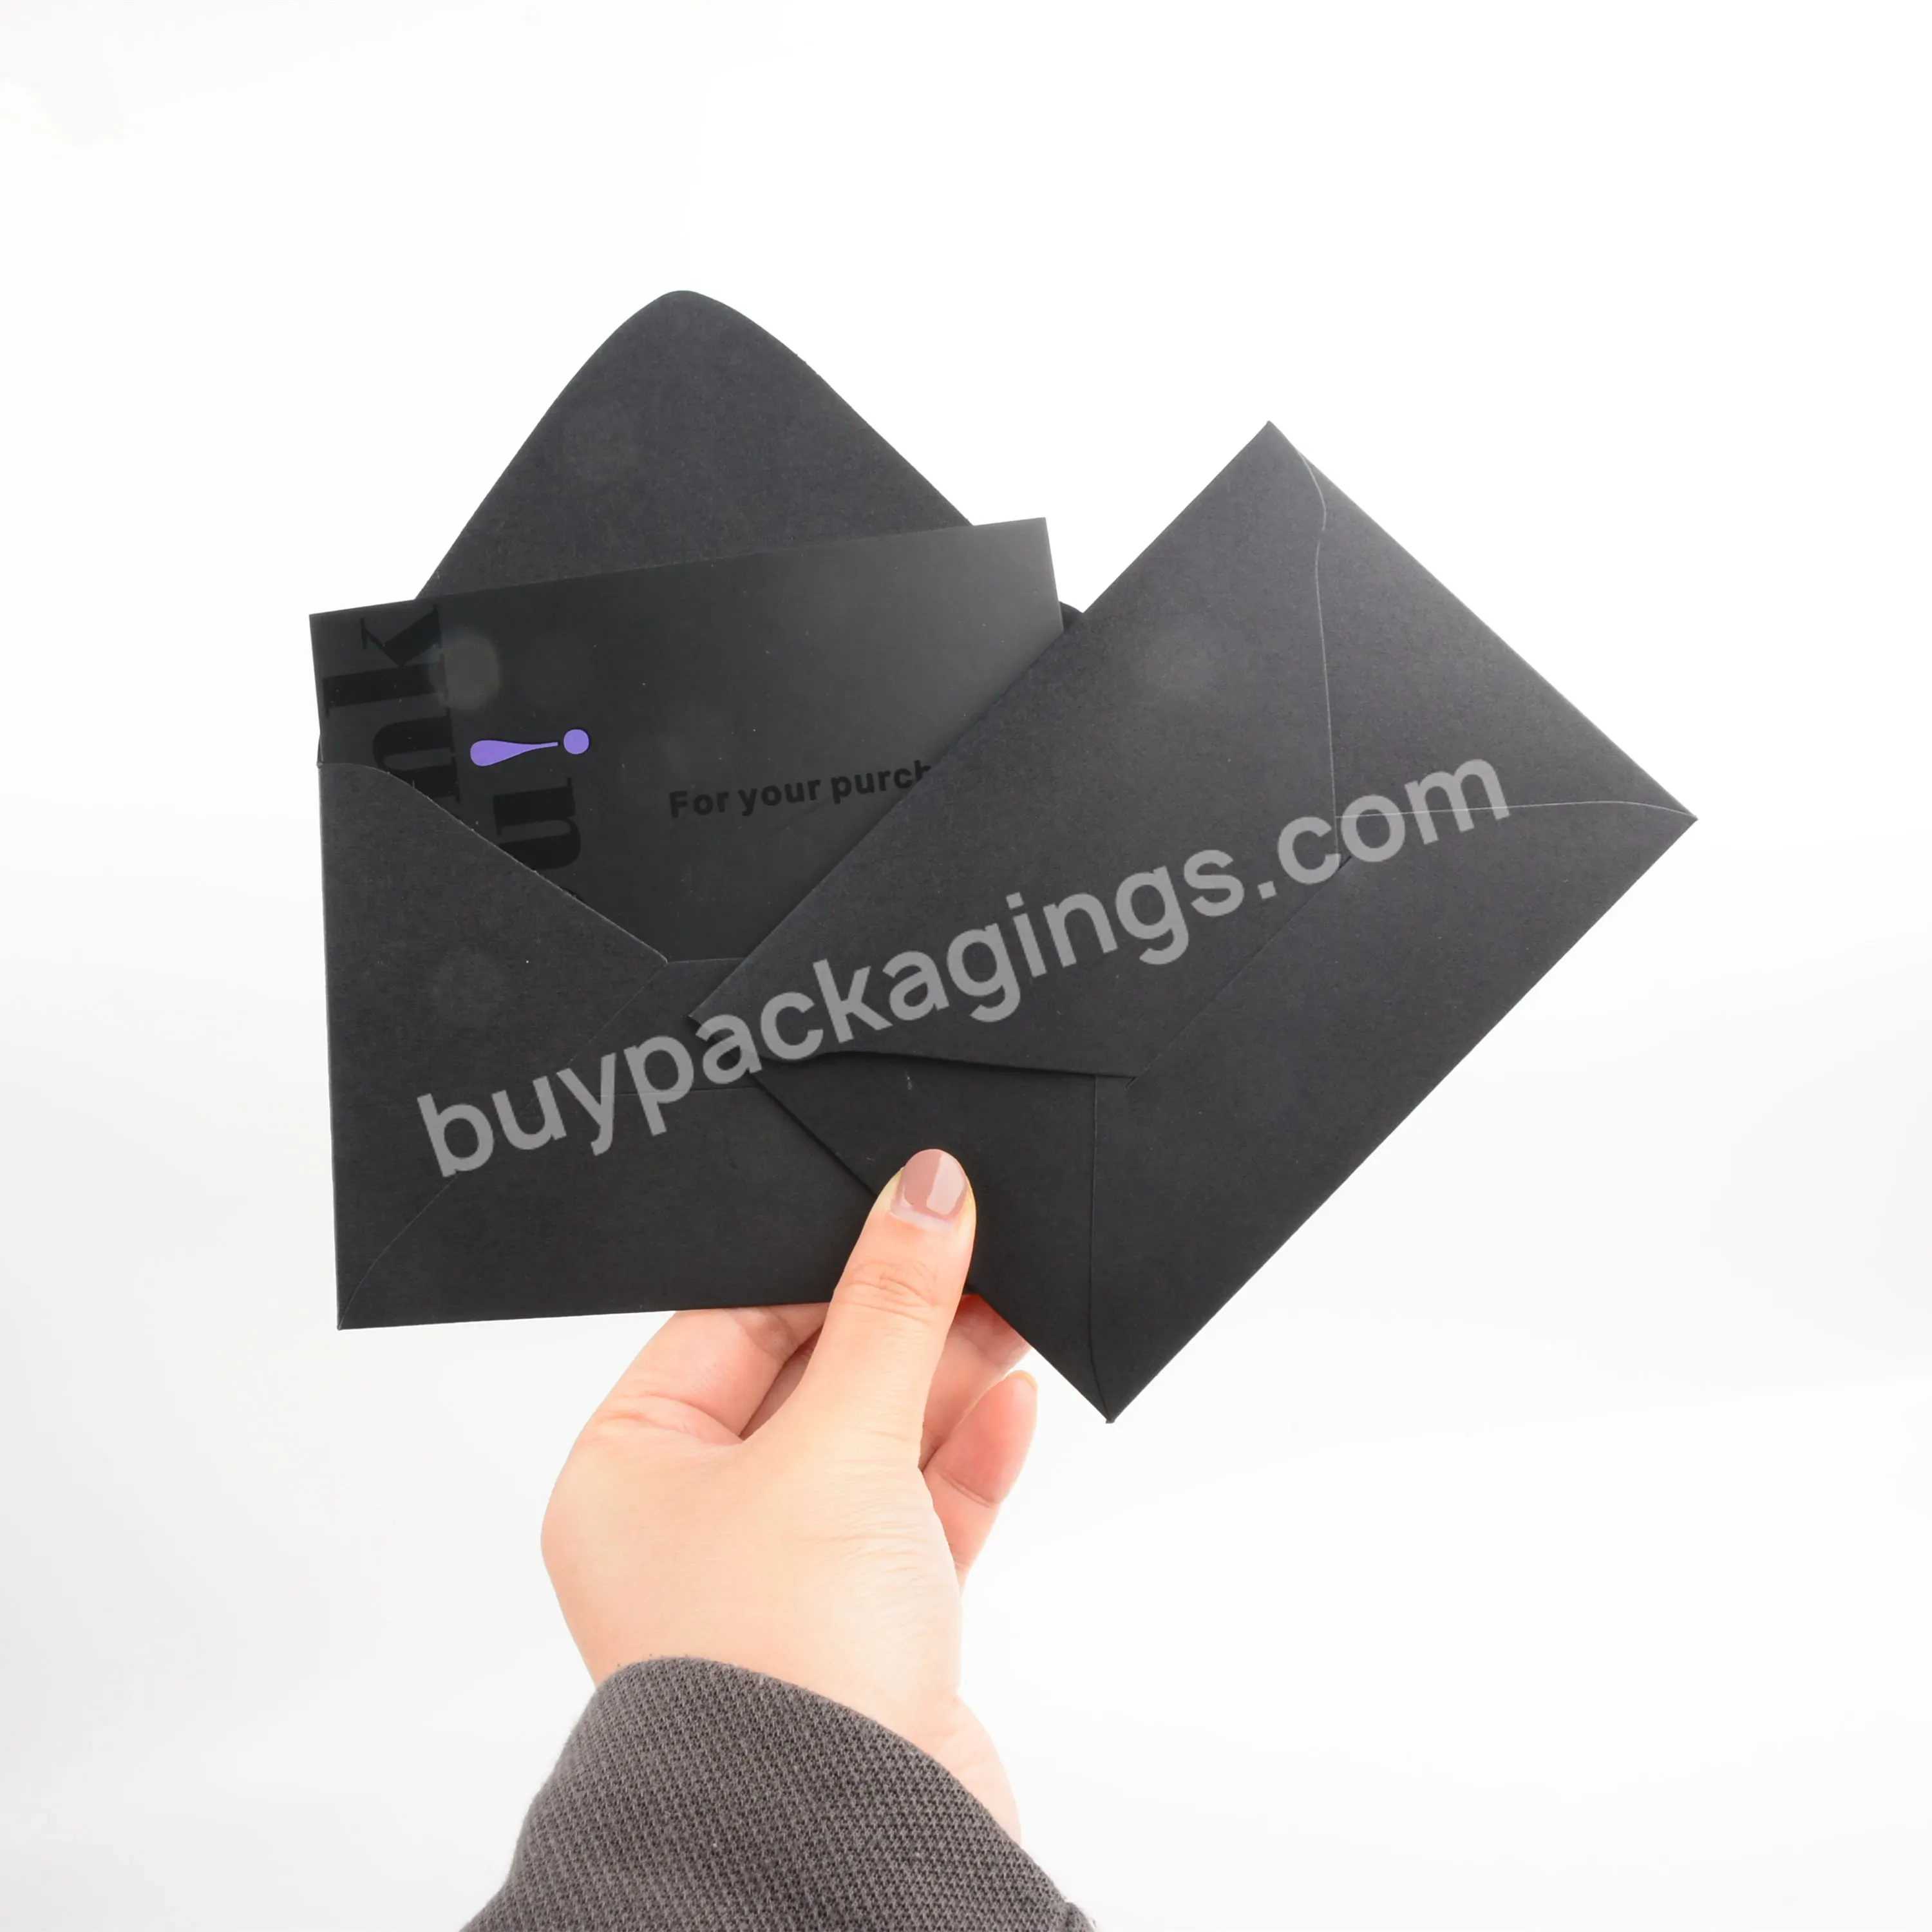 Customized Thank You Cards Matching Greeting Cards With Envelopes For Various Occasions To Clients Or Or Friends - Buy Greeting Cards With Envelopes,Thank You Cards Matching Envelope,Black Envelope.